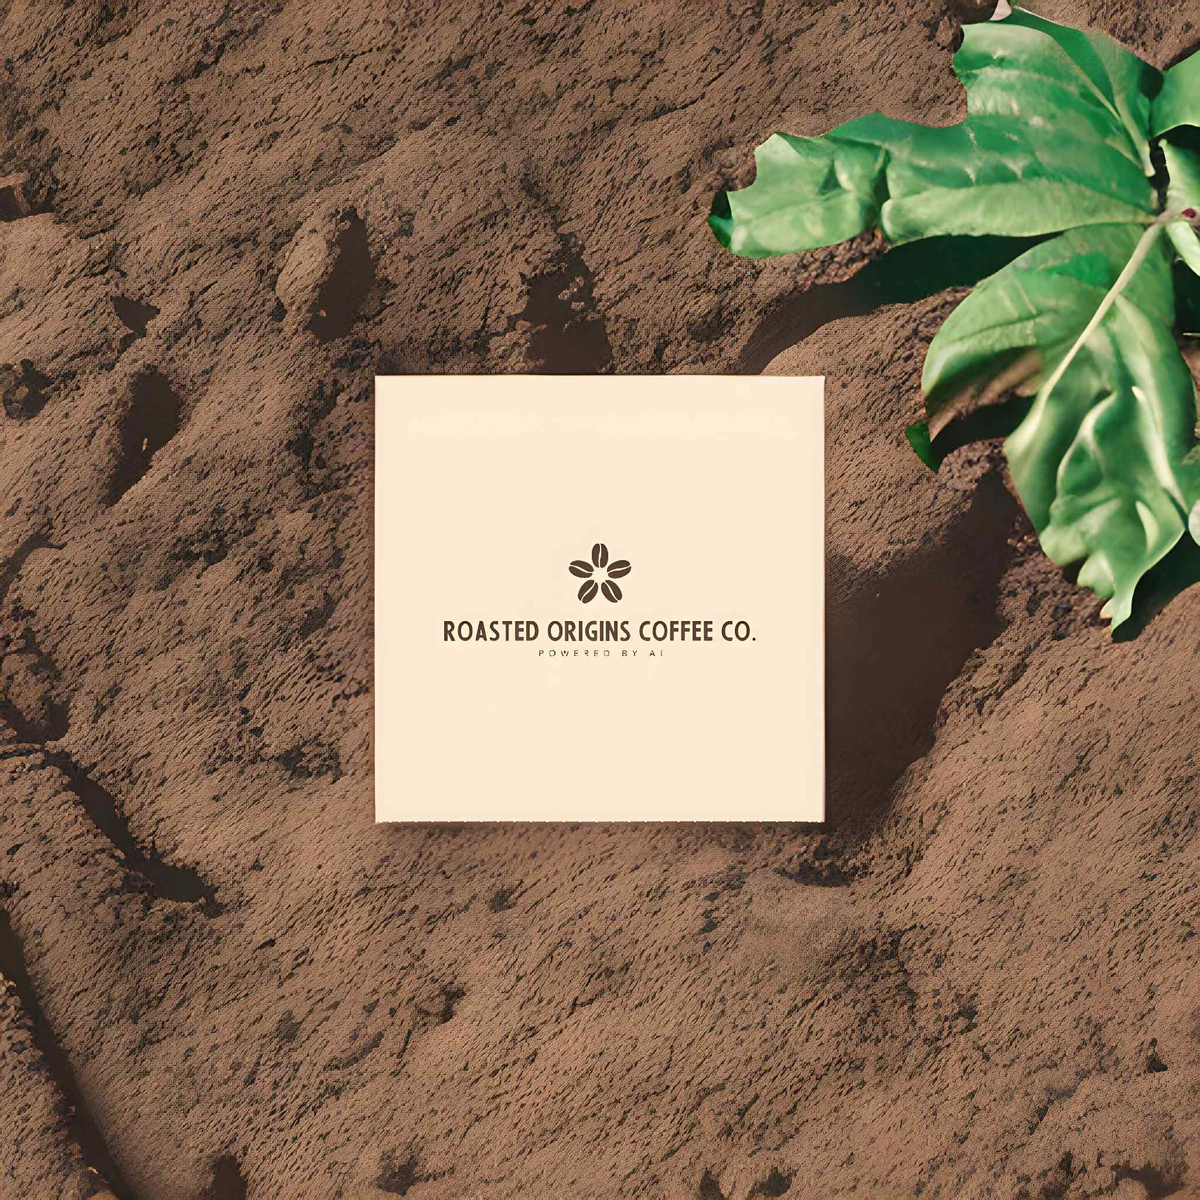 roasted origins logo on piece of paper in the dirt next to a plant 